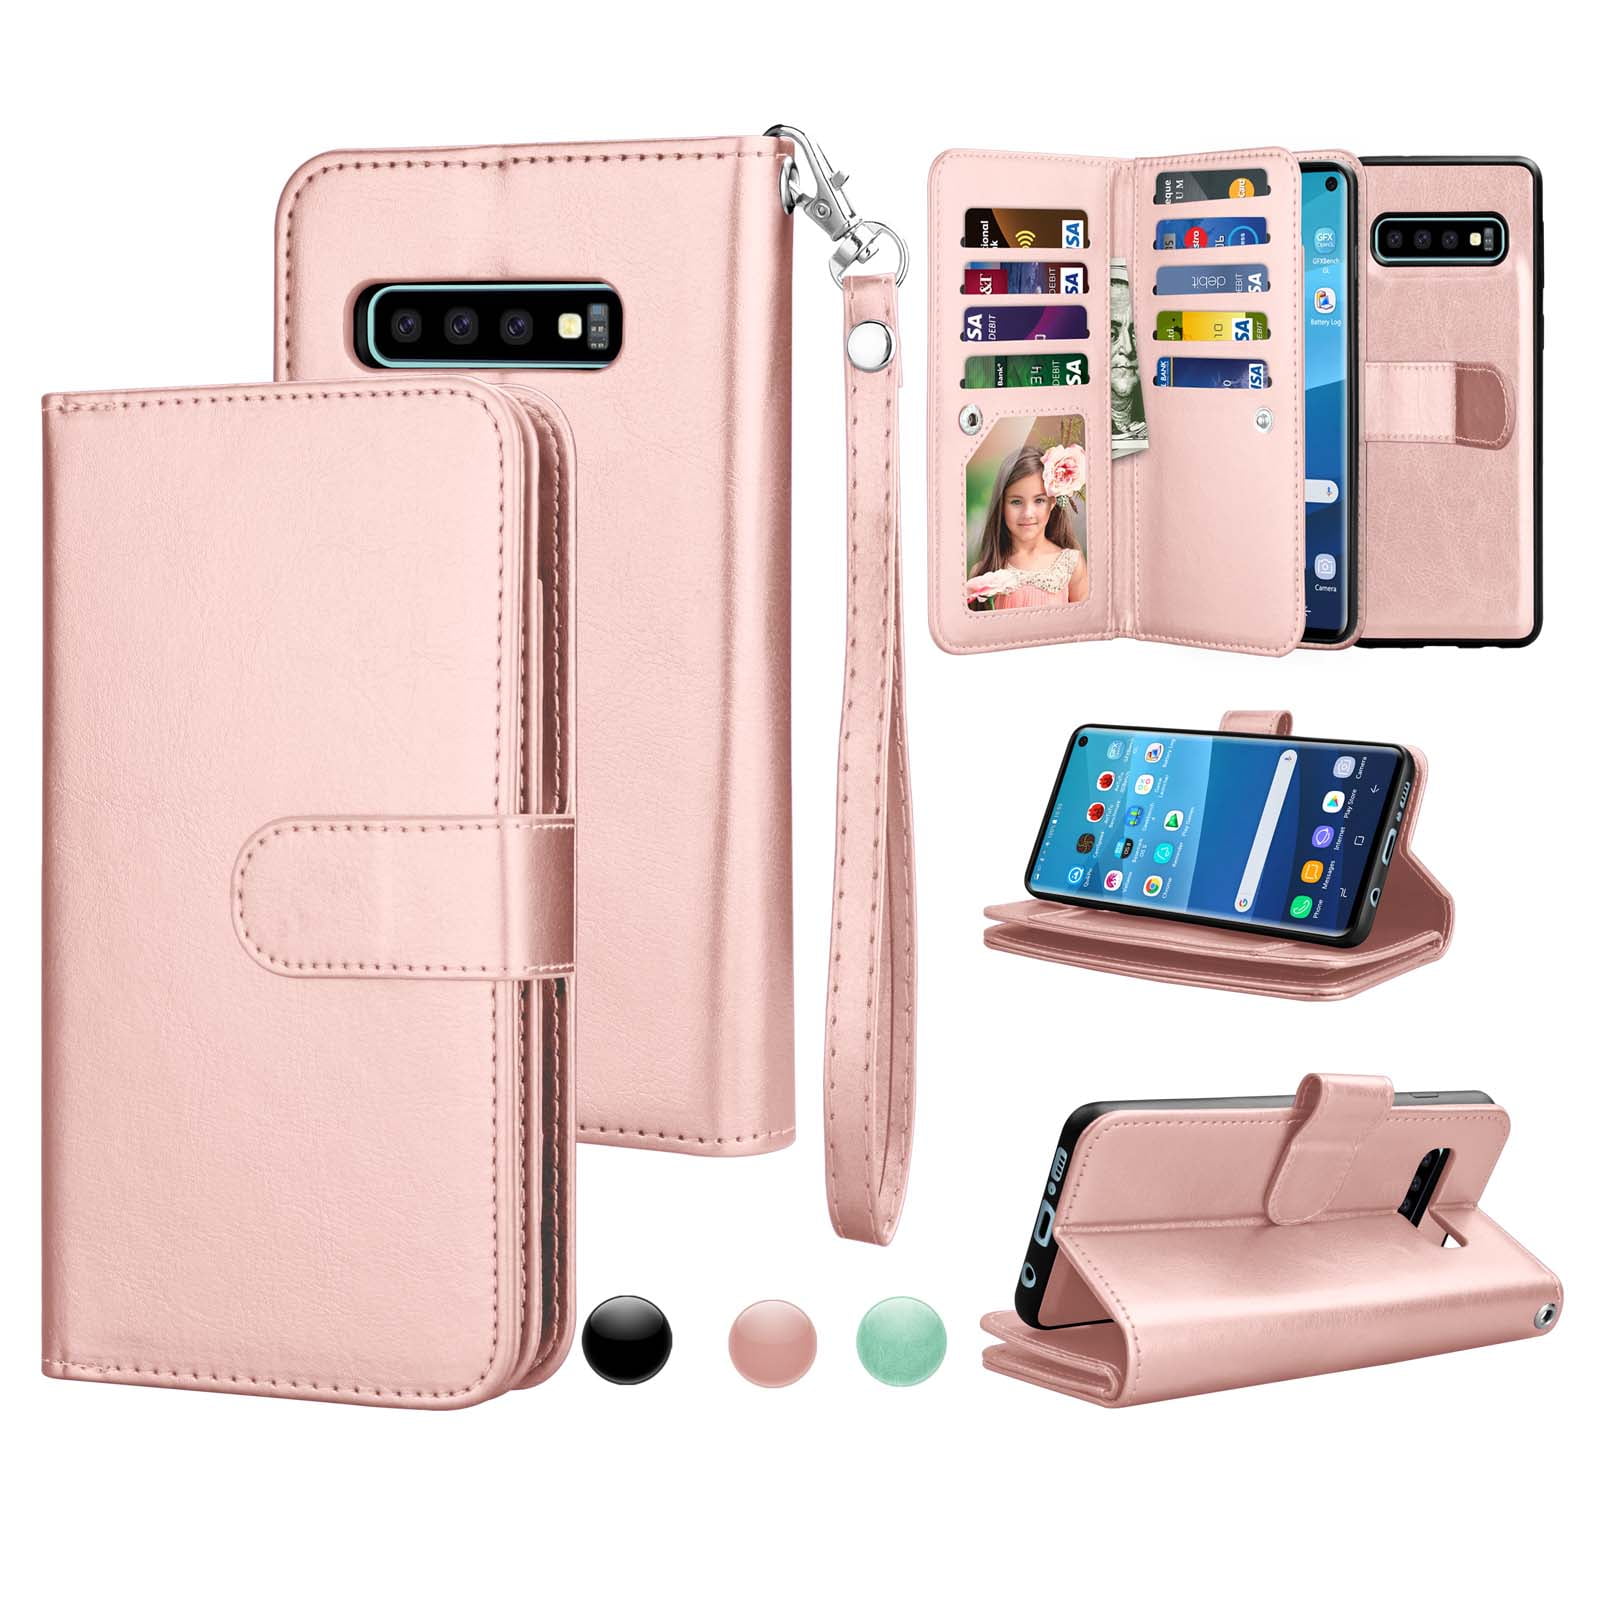 Samsung Galaxy S10 Plus Flip Case Cover for Leather Card Holders Mobile Phone case Kickstand Extra-Shockproof Business Flip Cover 